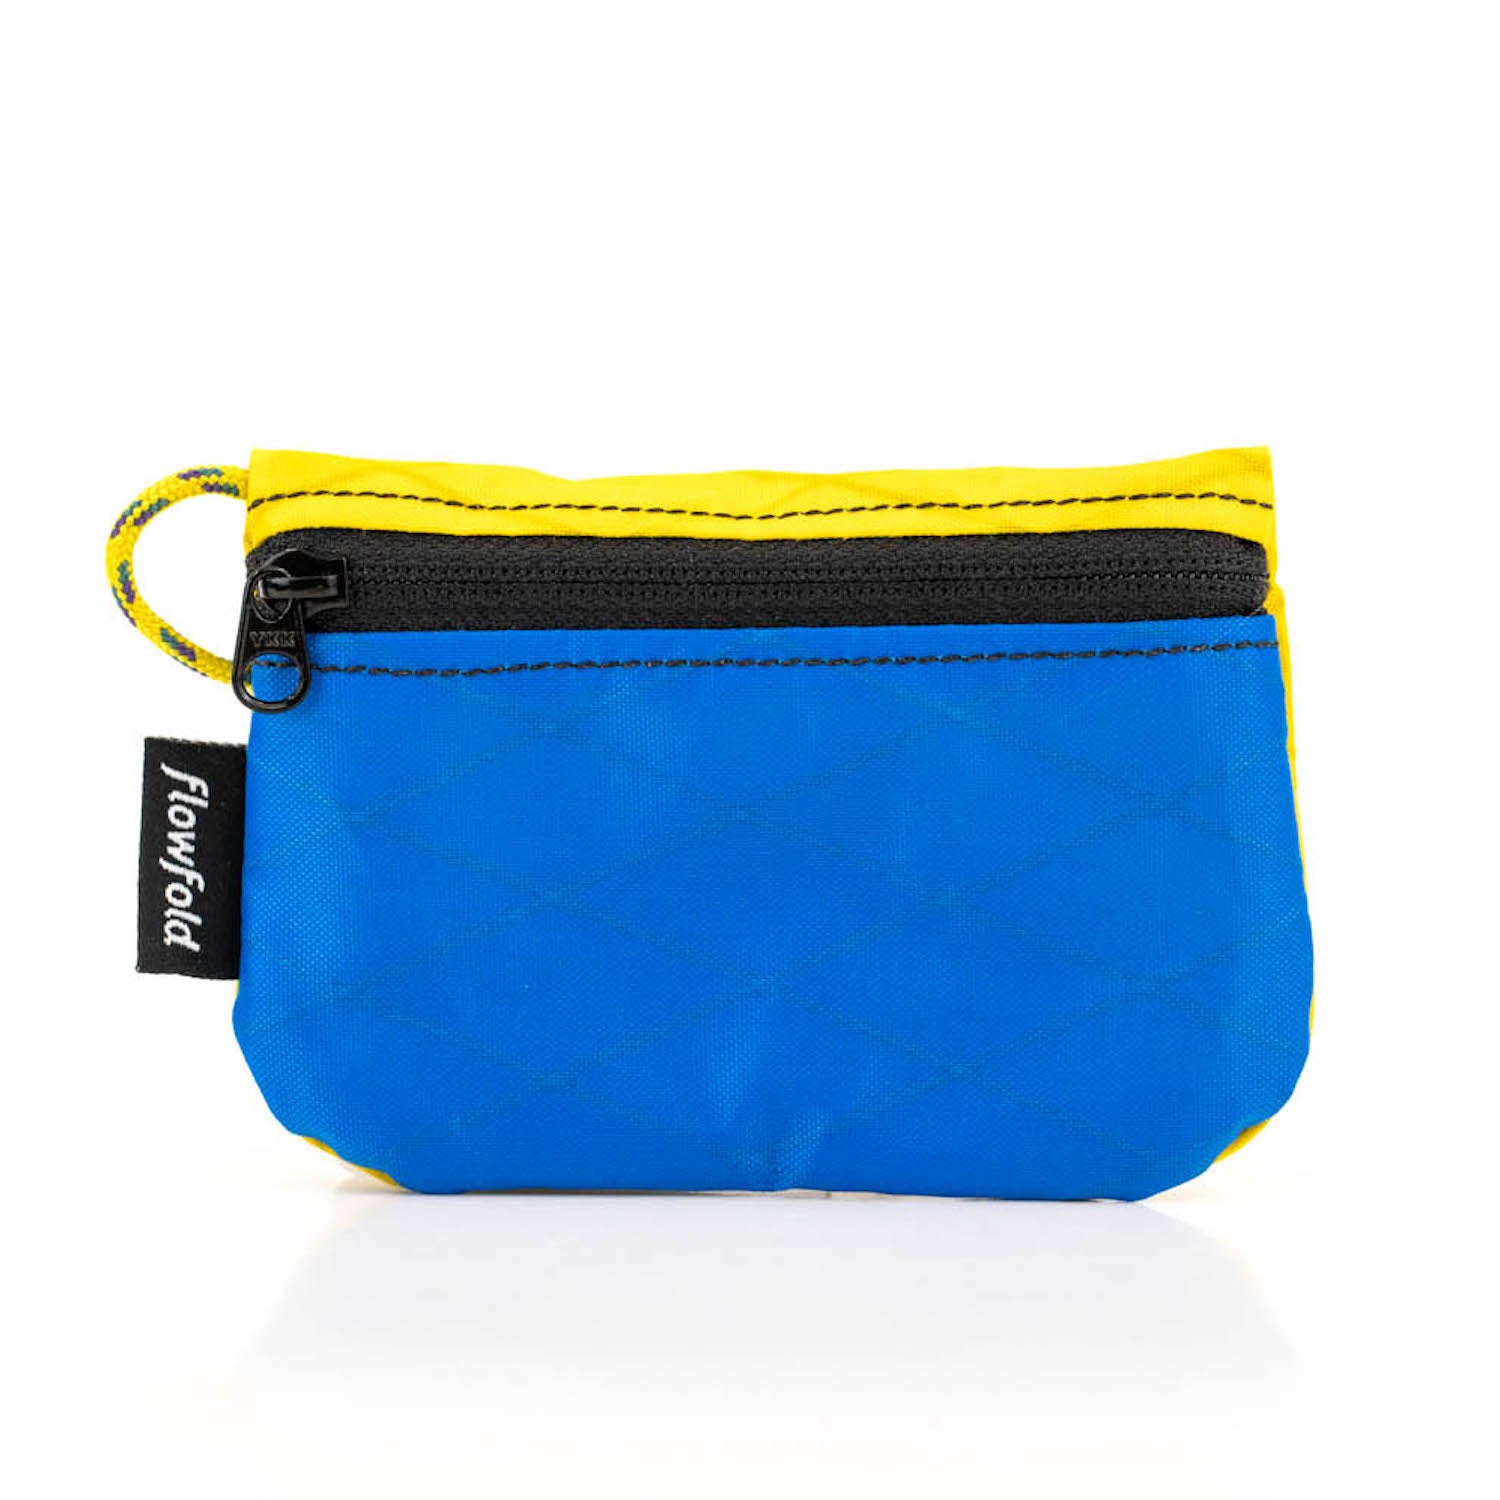 Flowfold Blue/Yellow Essentialist Coin Pouch Wallet For Cash, Cards, and Coins Made in USA, Maine by Flowfold 